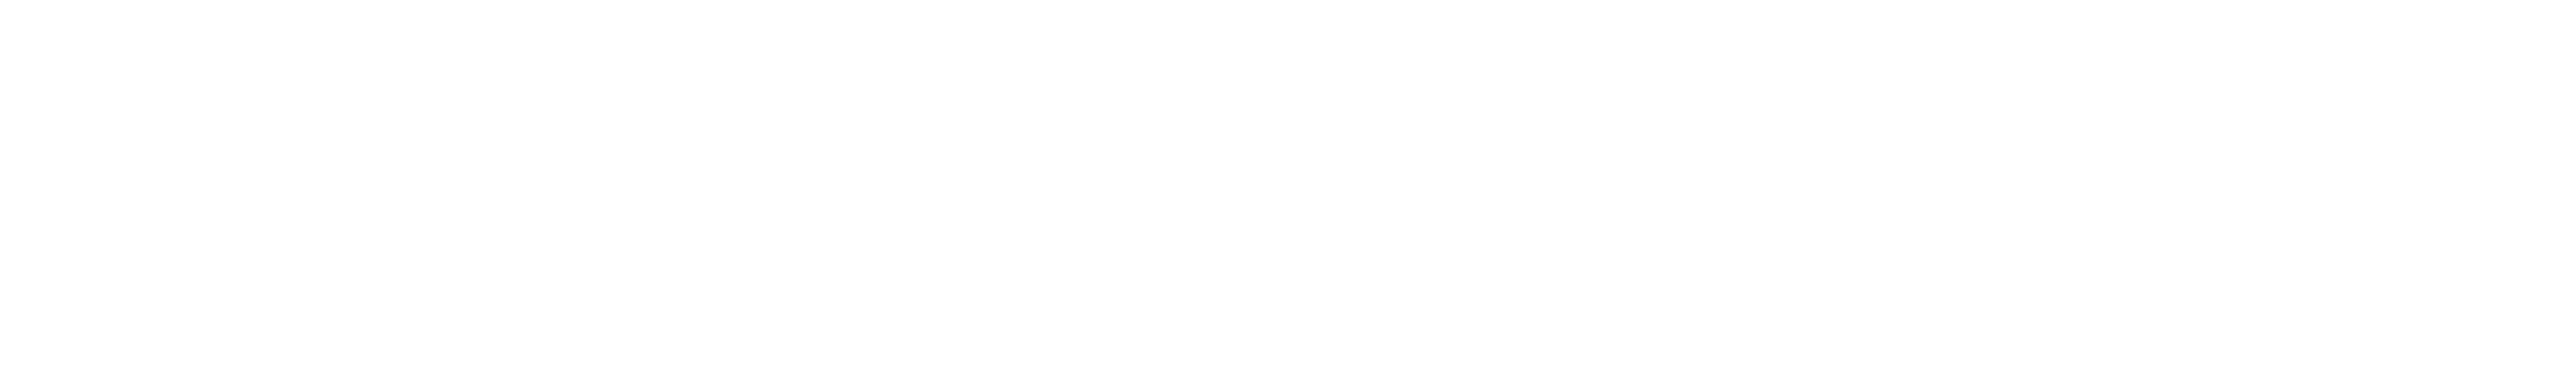 Destination 2030. The passionate pursuite of sustainable water, sanitation, and hygiene services for all.